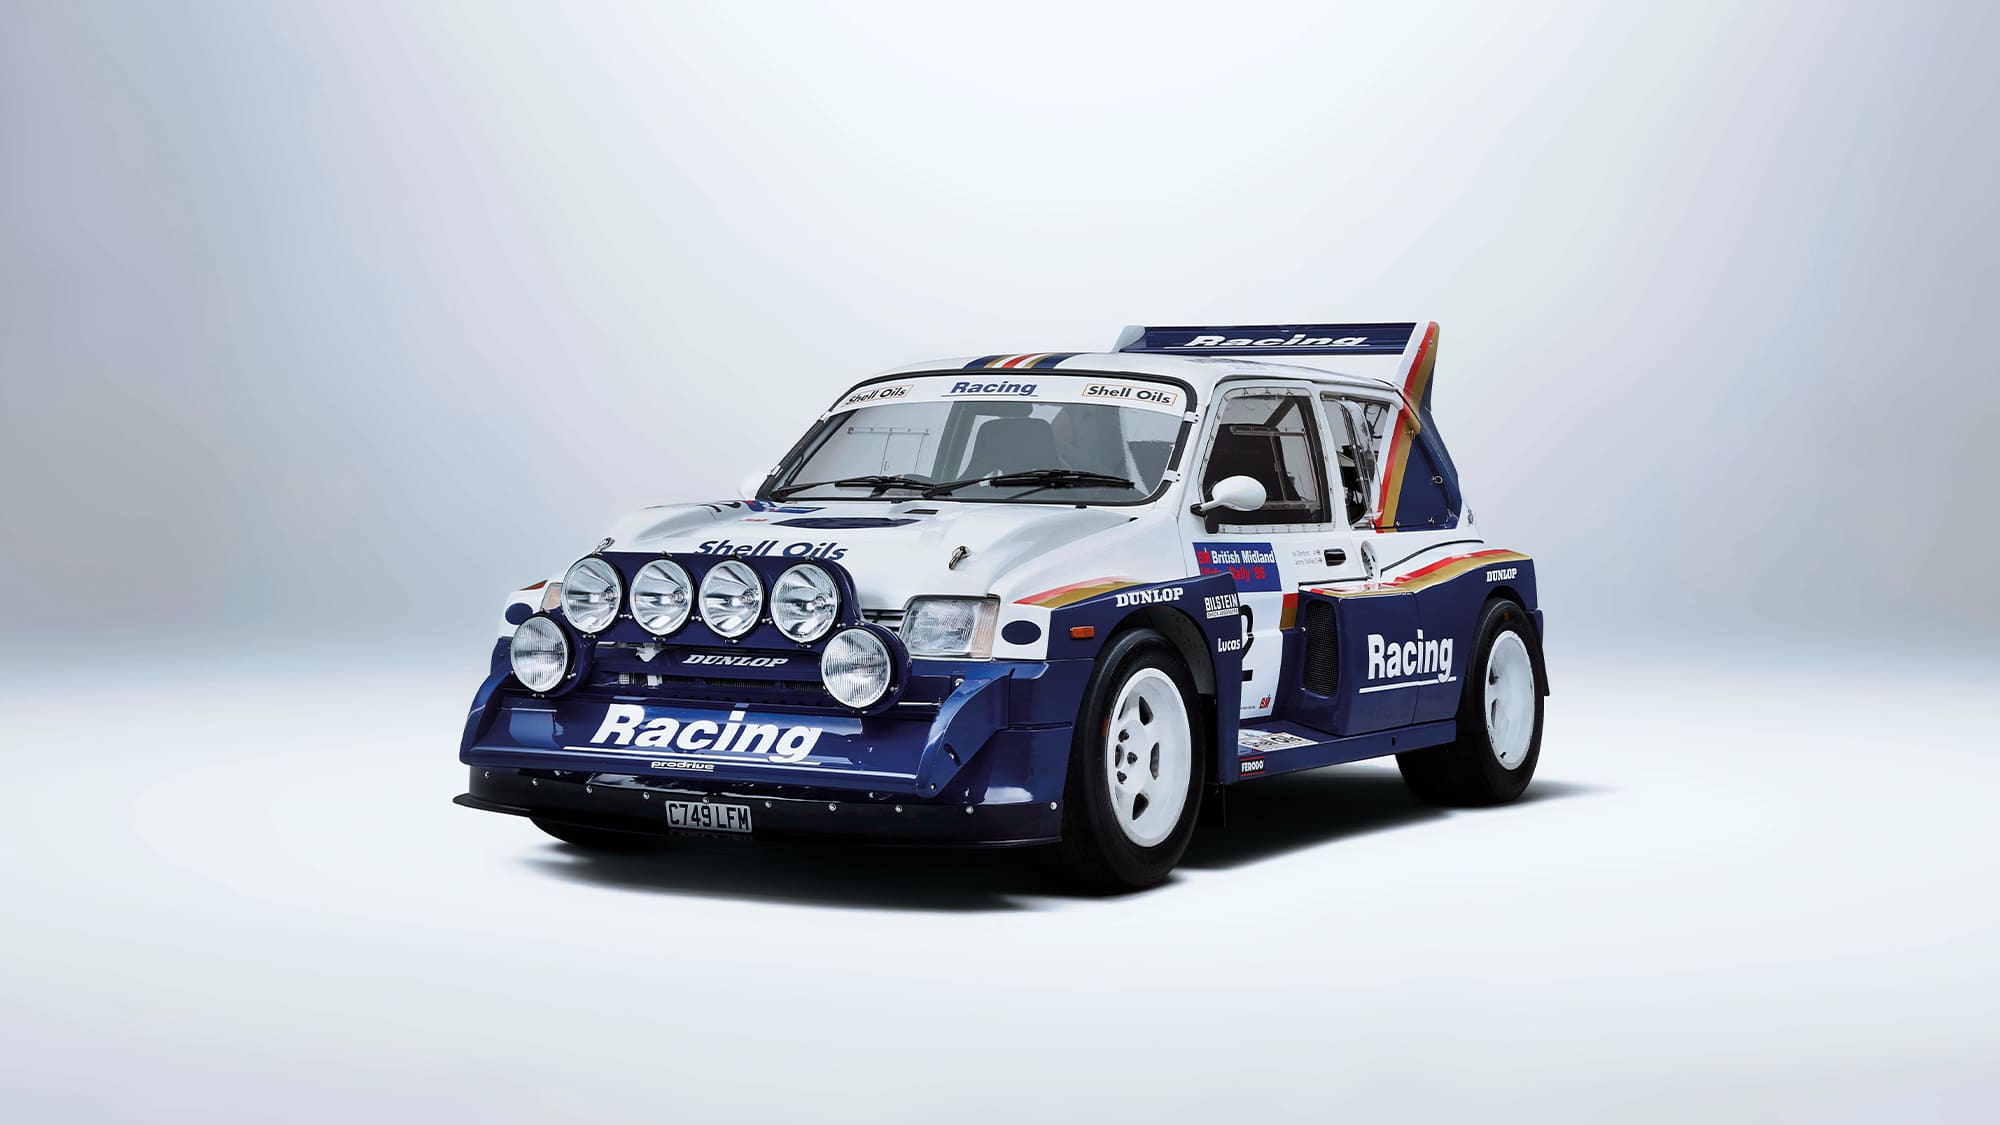 Metro 6R4 in Rothmans colours